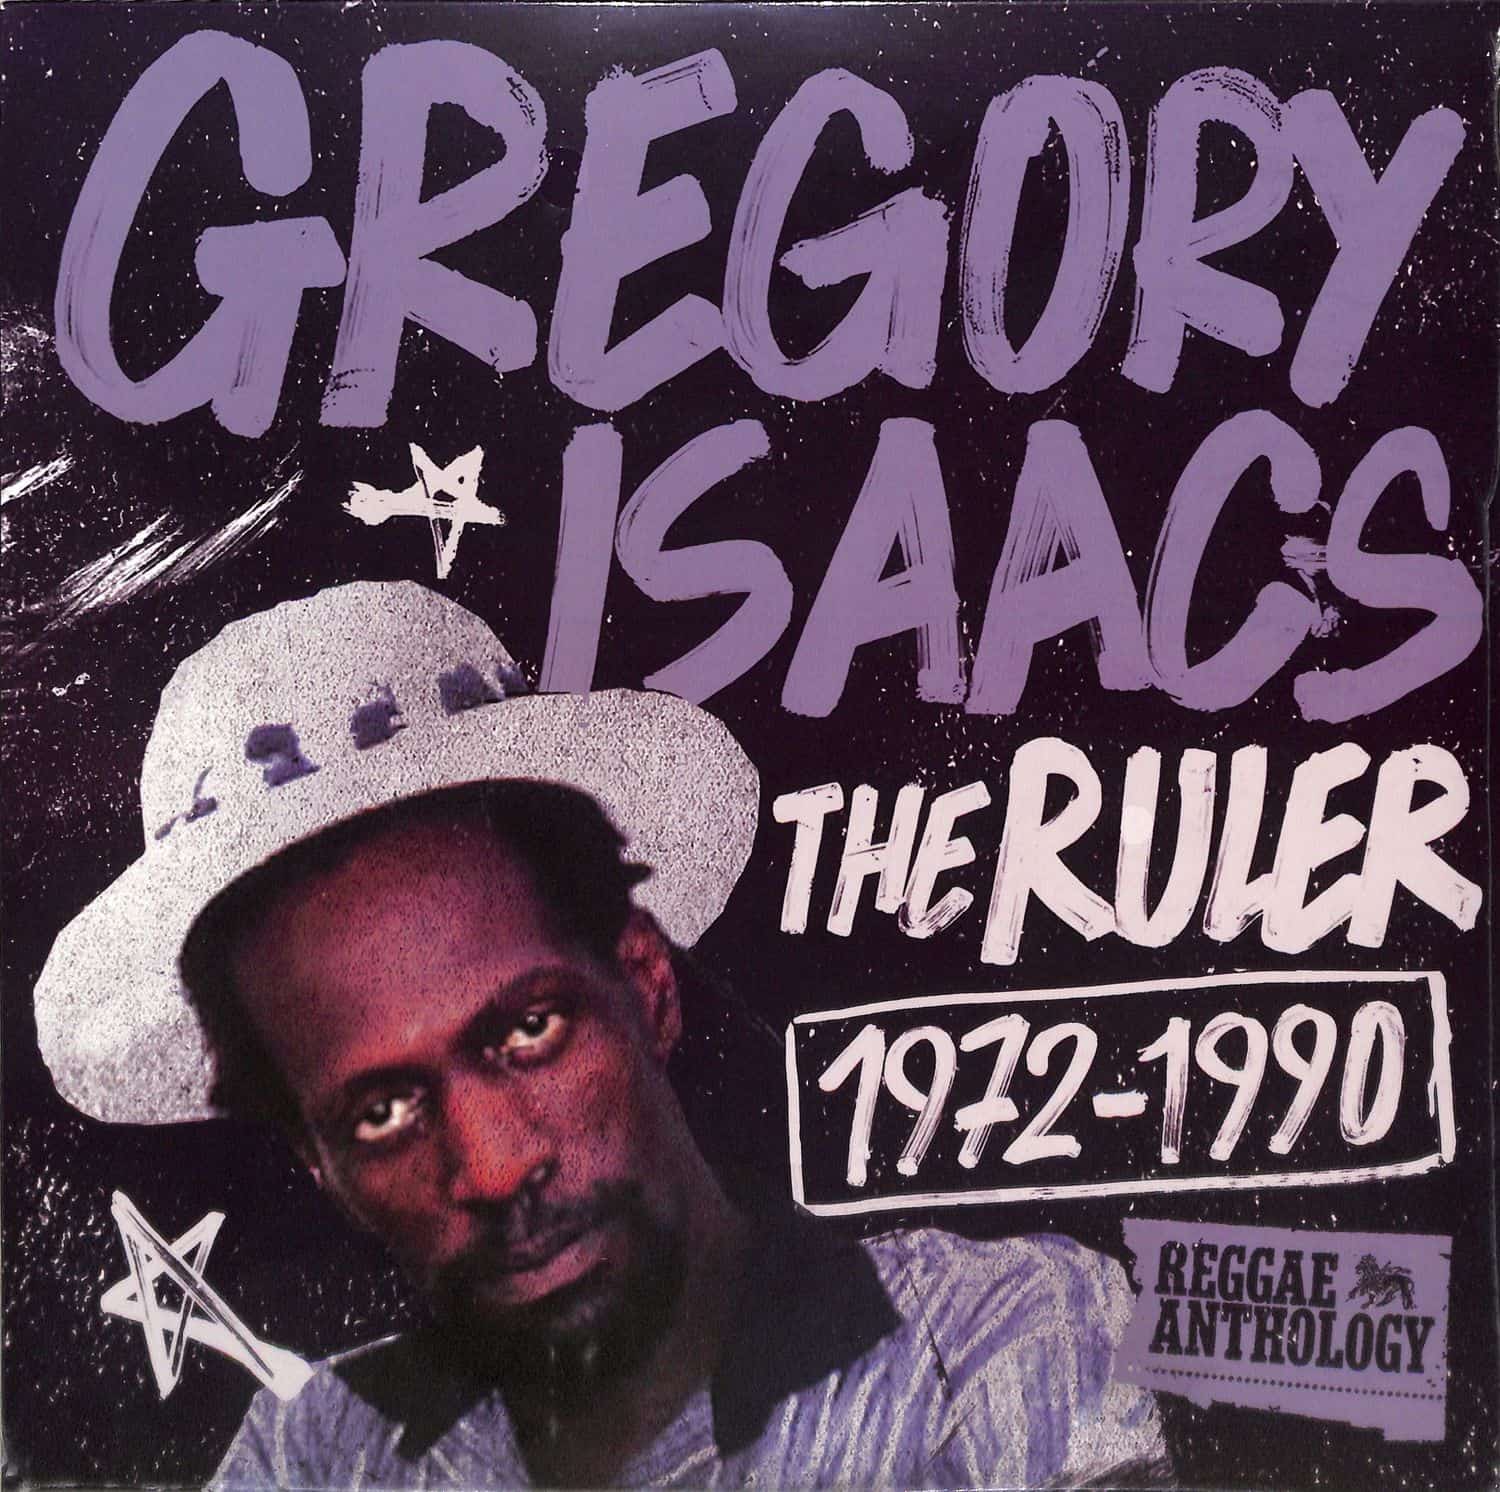 Gregory Isaacs - THE RULER 